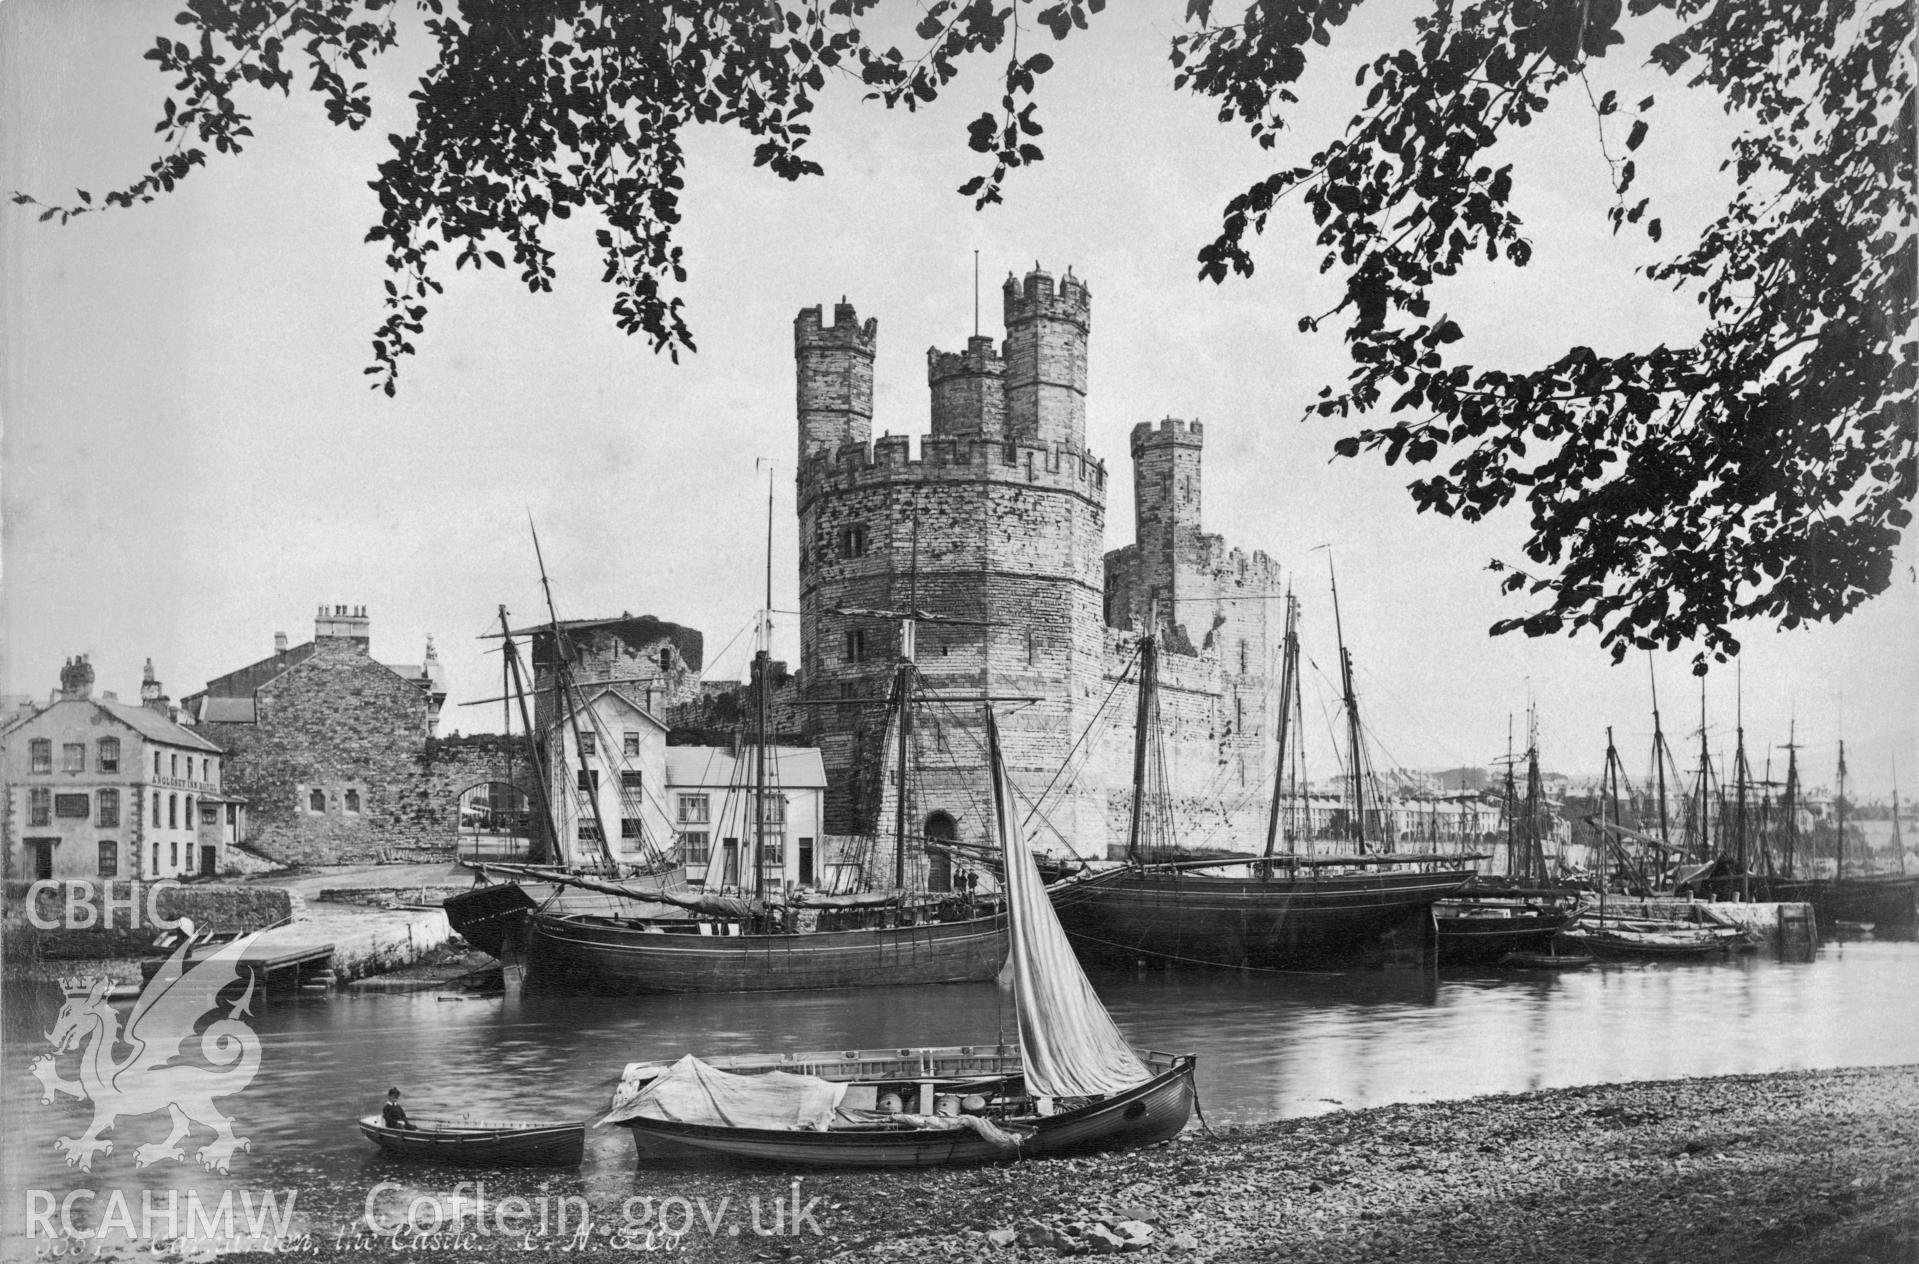 Caernarfon Castle; undated black and white photograph showing the castle also showing in the eastern side of the entrance to the Seiont and coastal traders.